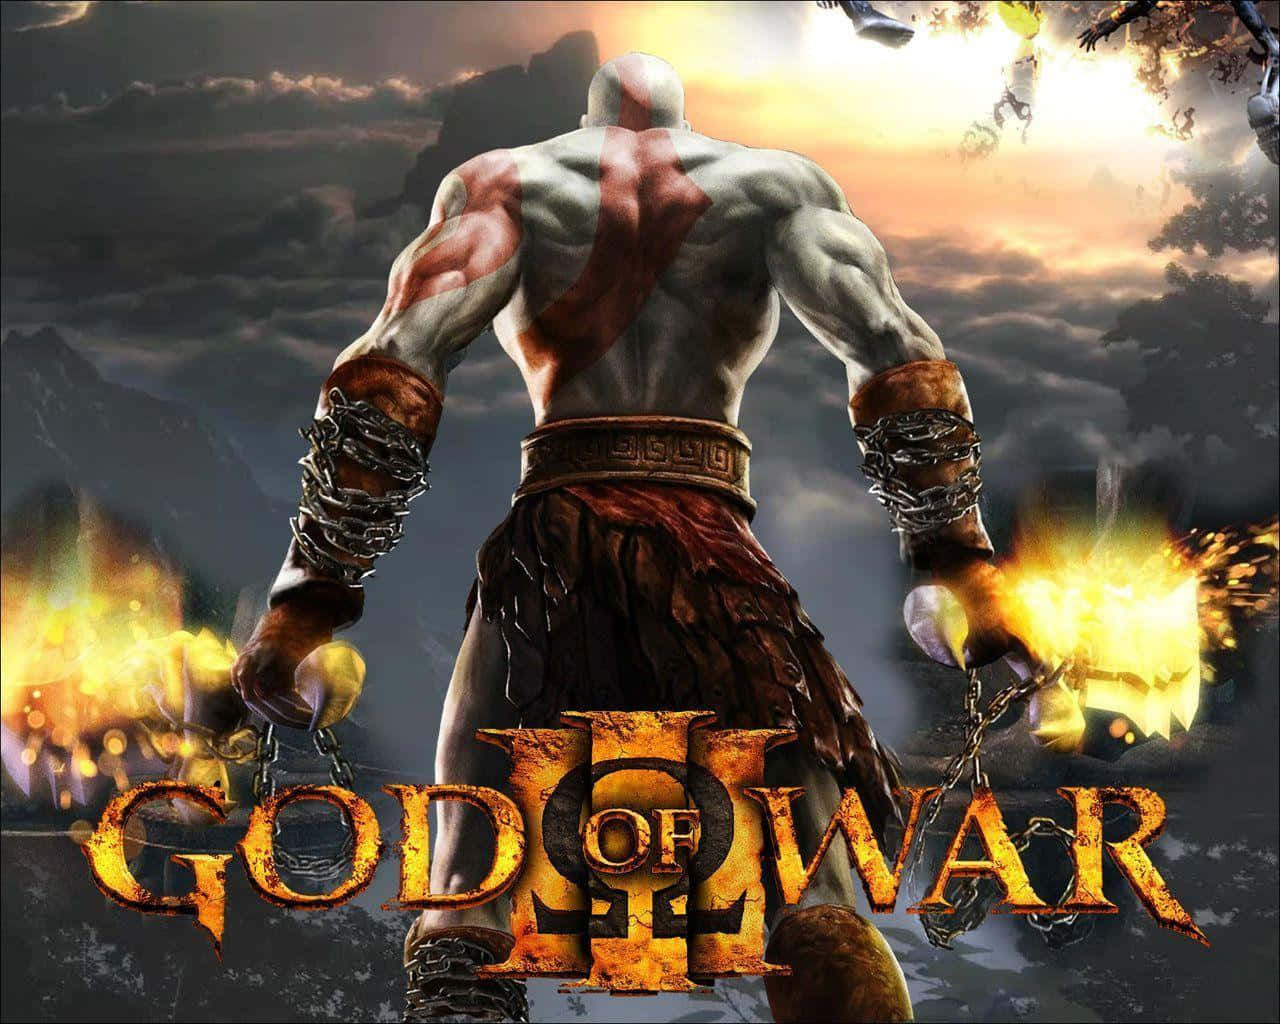 Kratos in all His Rage Awaiting an Epic Battle in God Of War 3 Wallpaper